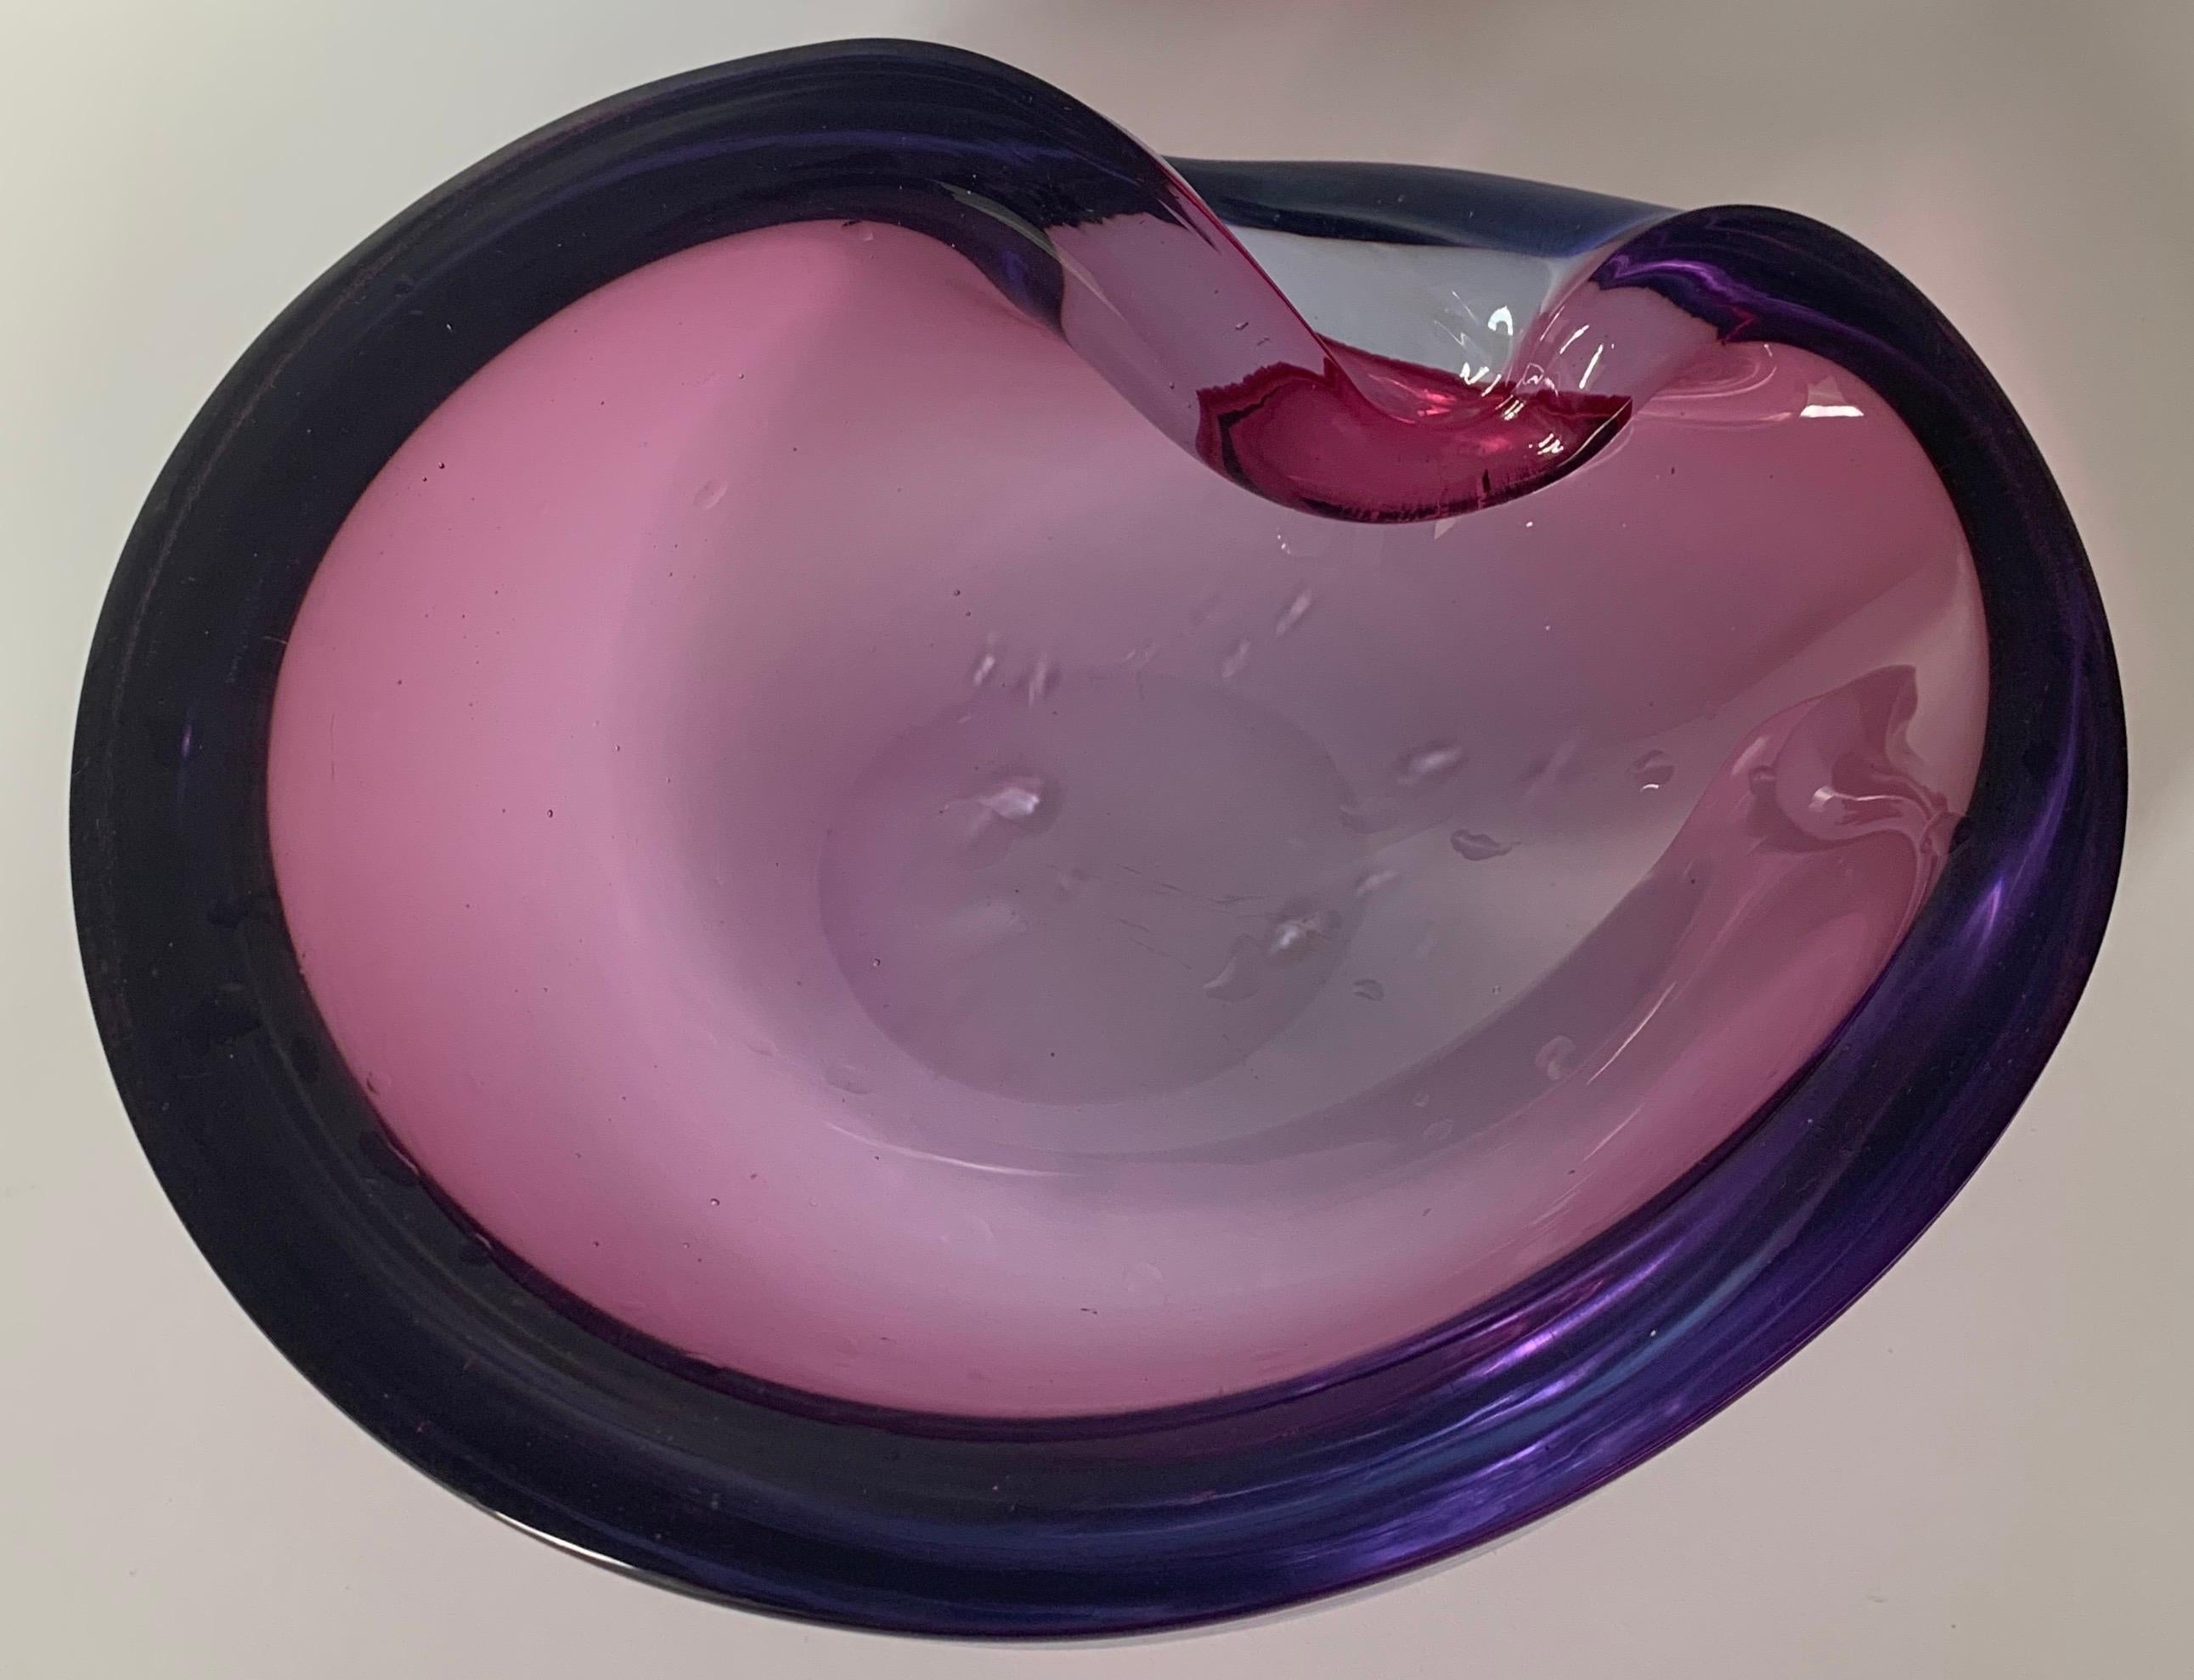 Midcentury Murano Seguso attributed ashtray. Amethyst purple with blue and pink detailing. No makers mark or signature.